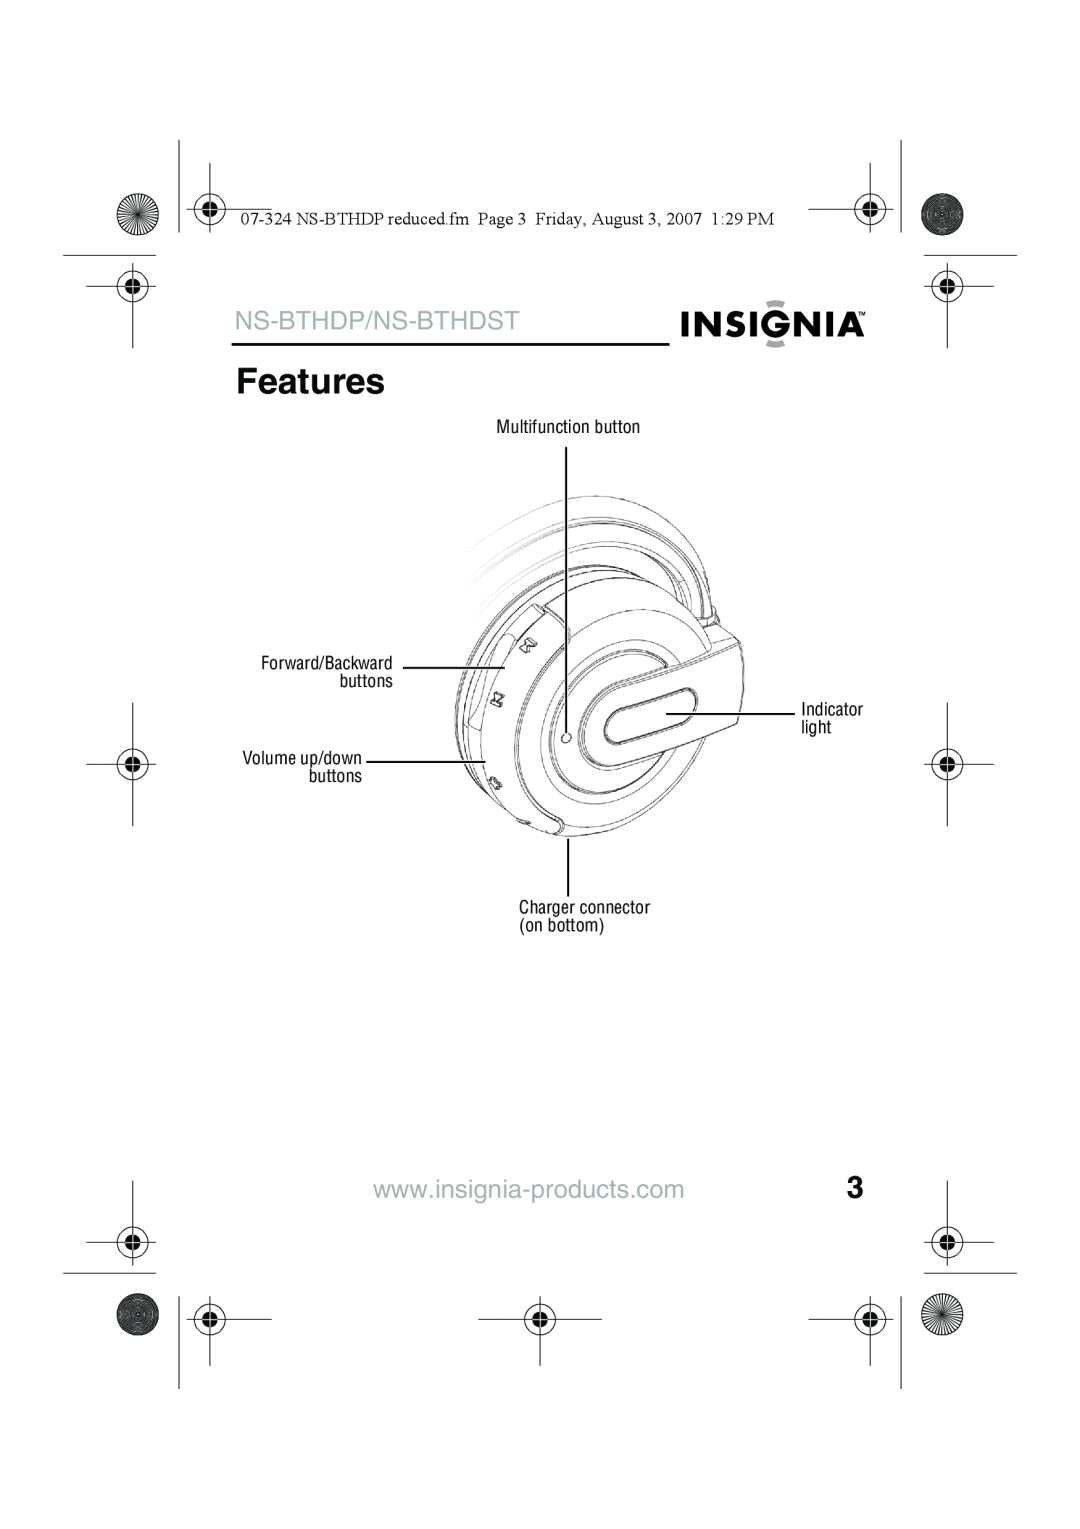 Insignia NS-BTHDST manual Features, Ns-Bthdp/Ns-Bthdst, Forward/Backward buttons Volume up/down buttons 